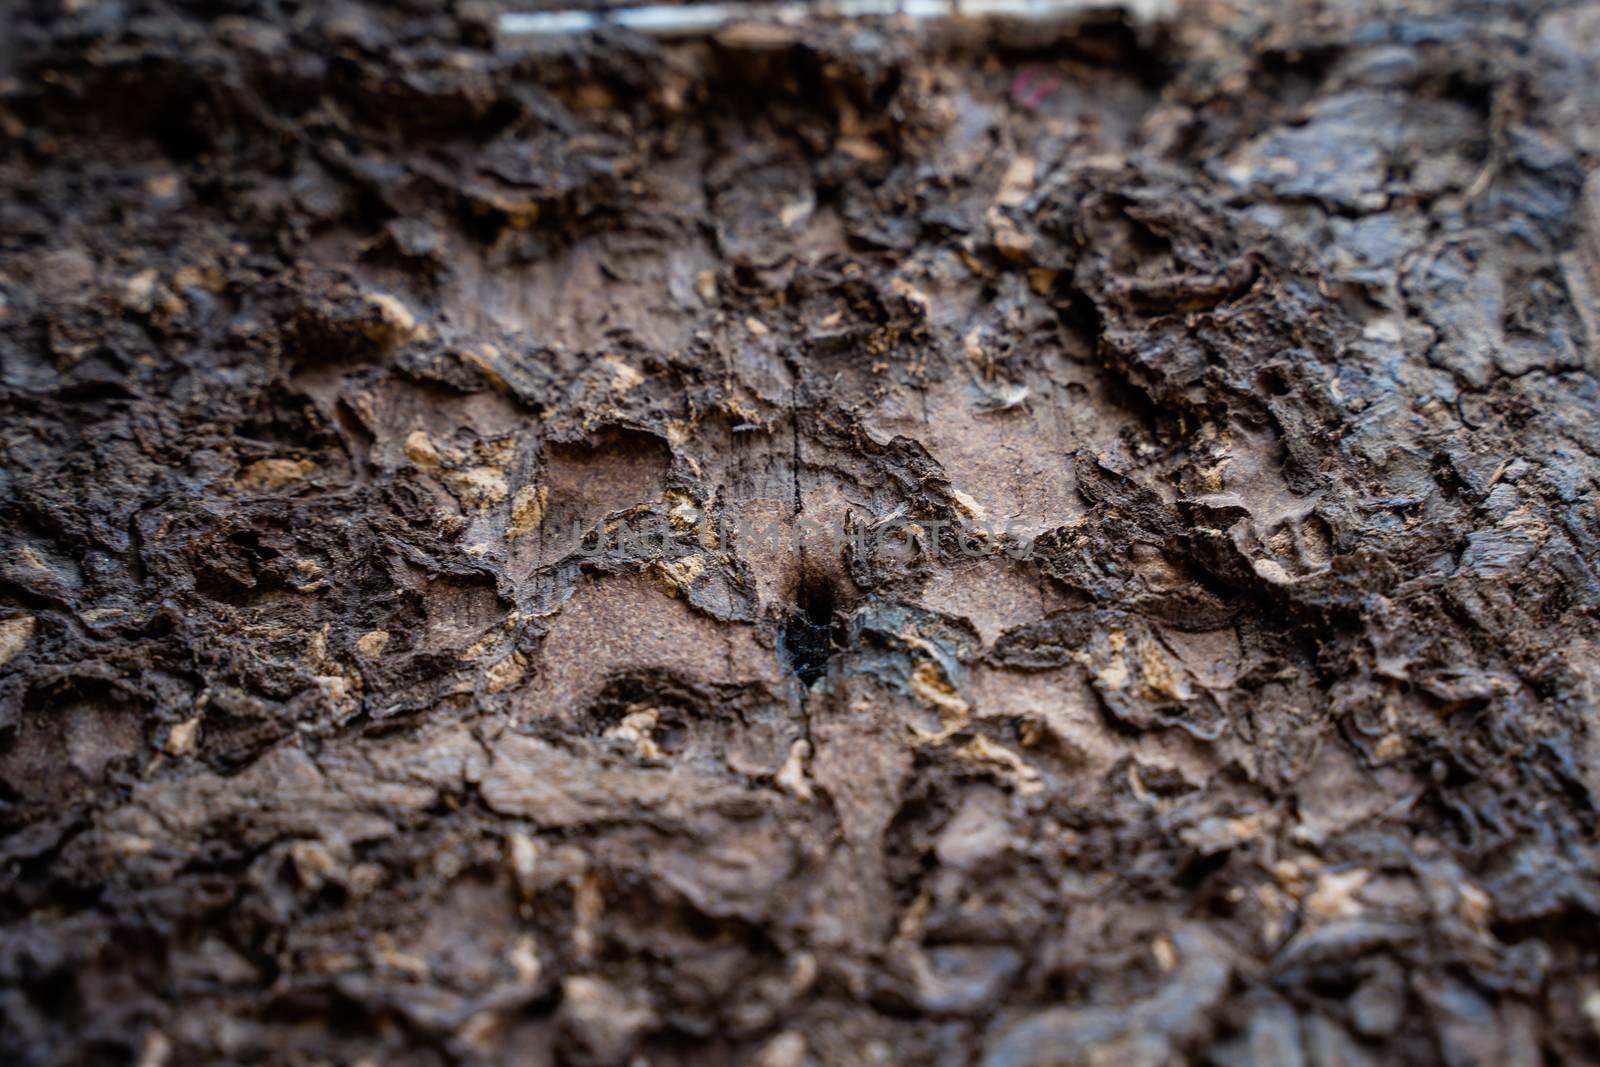 The Termite infested wood close up. Termite infested wood surface close up